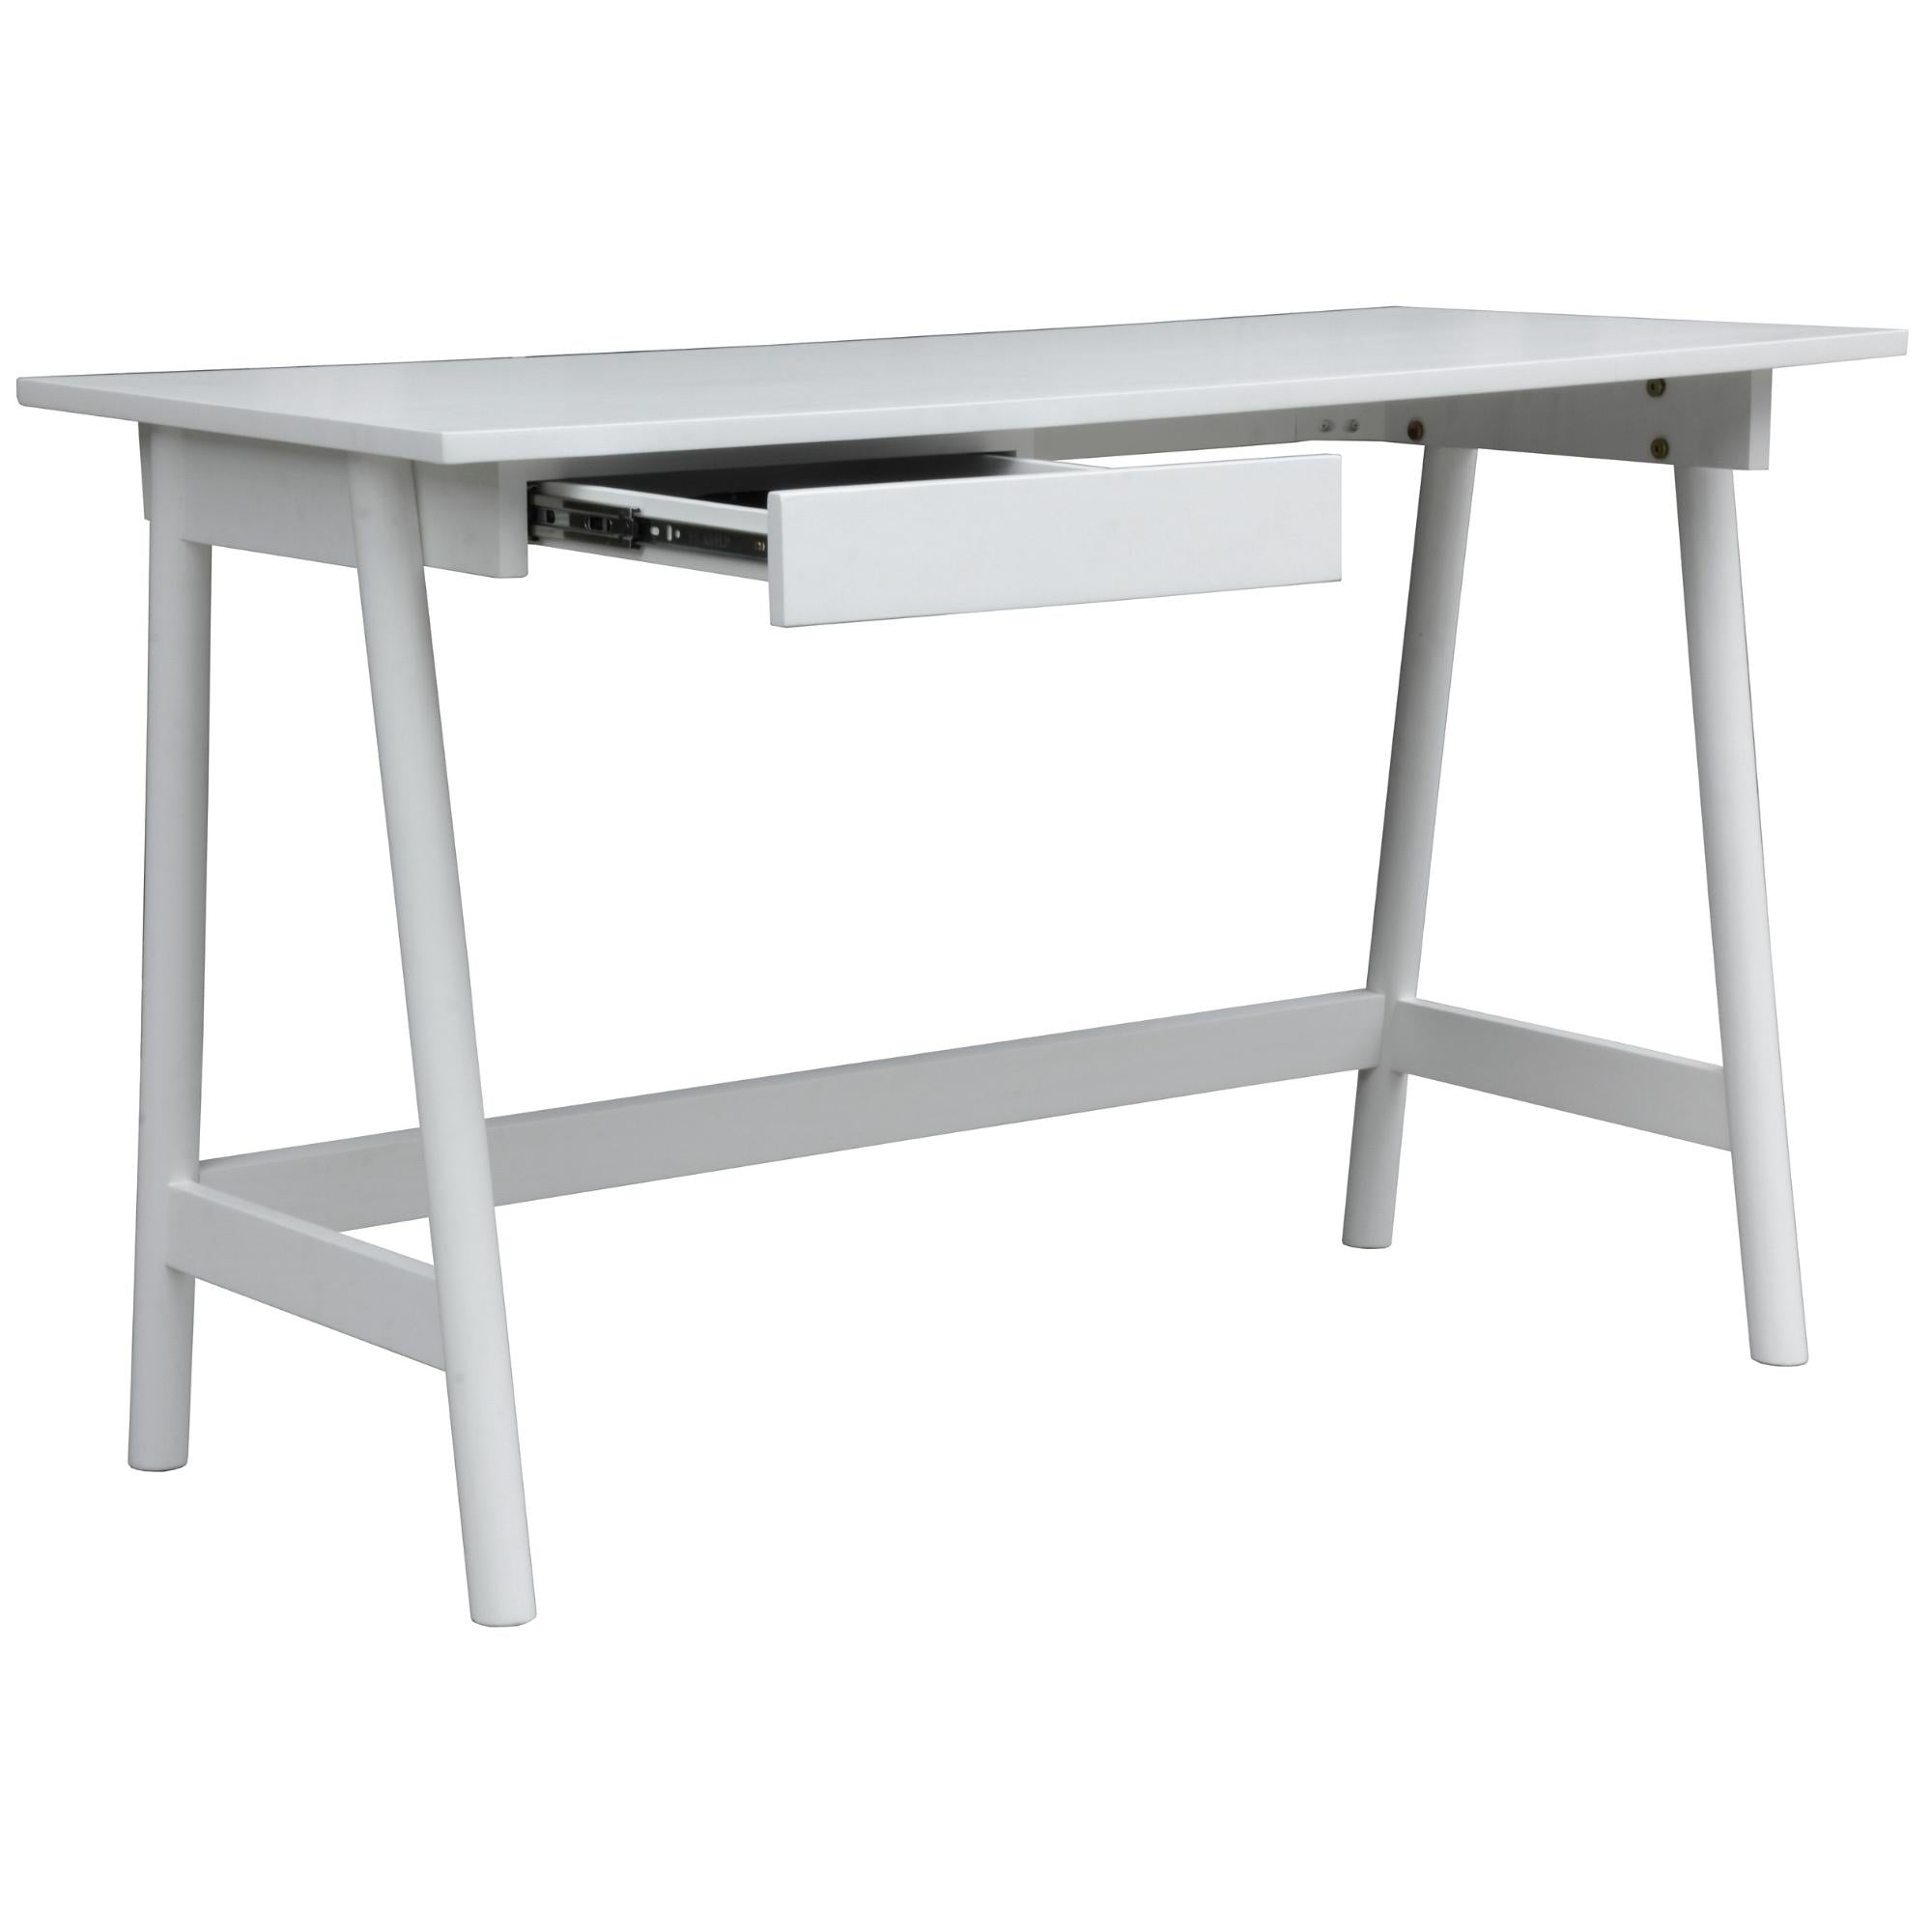 Mindil Office Desk Student Study Table Solid Wooden Timber Frame - White Deals499